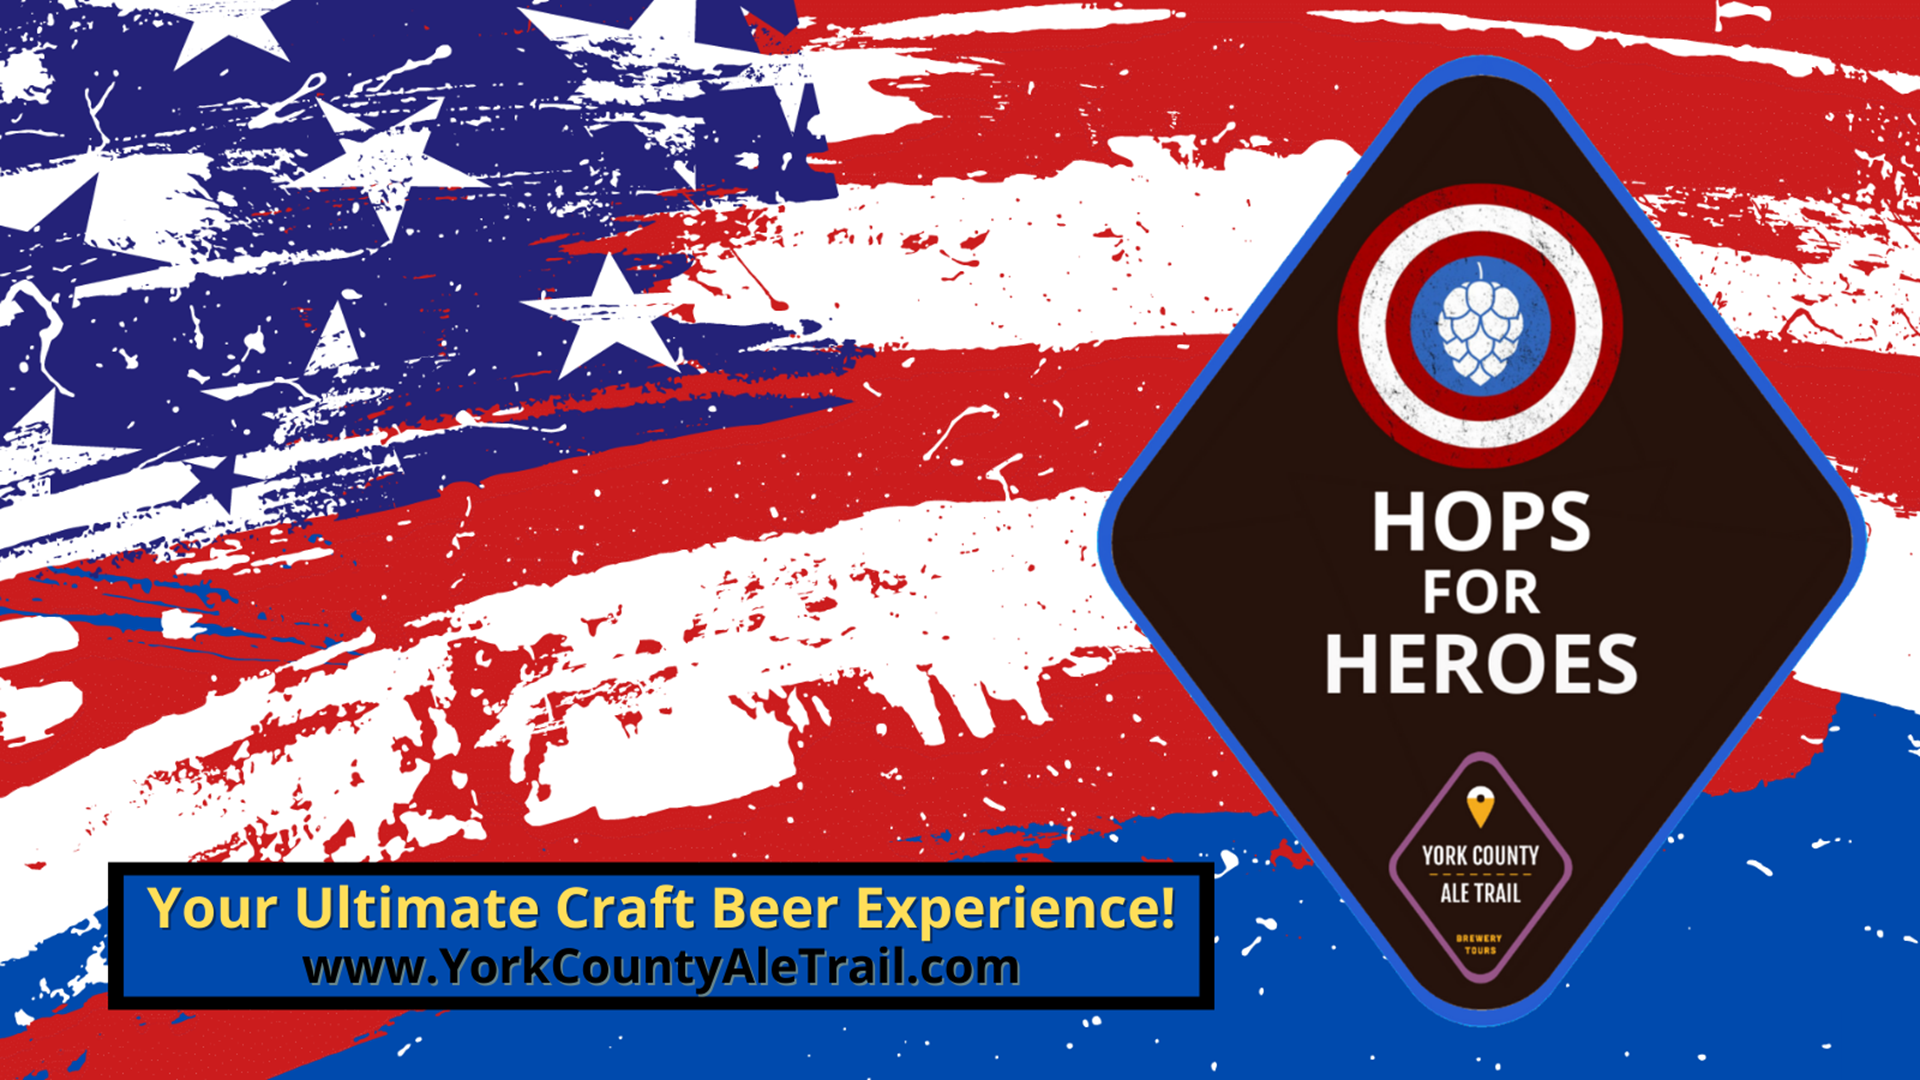 The York County Ale Trail's new program donates money to non-profits that benefit those who serve their communities.